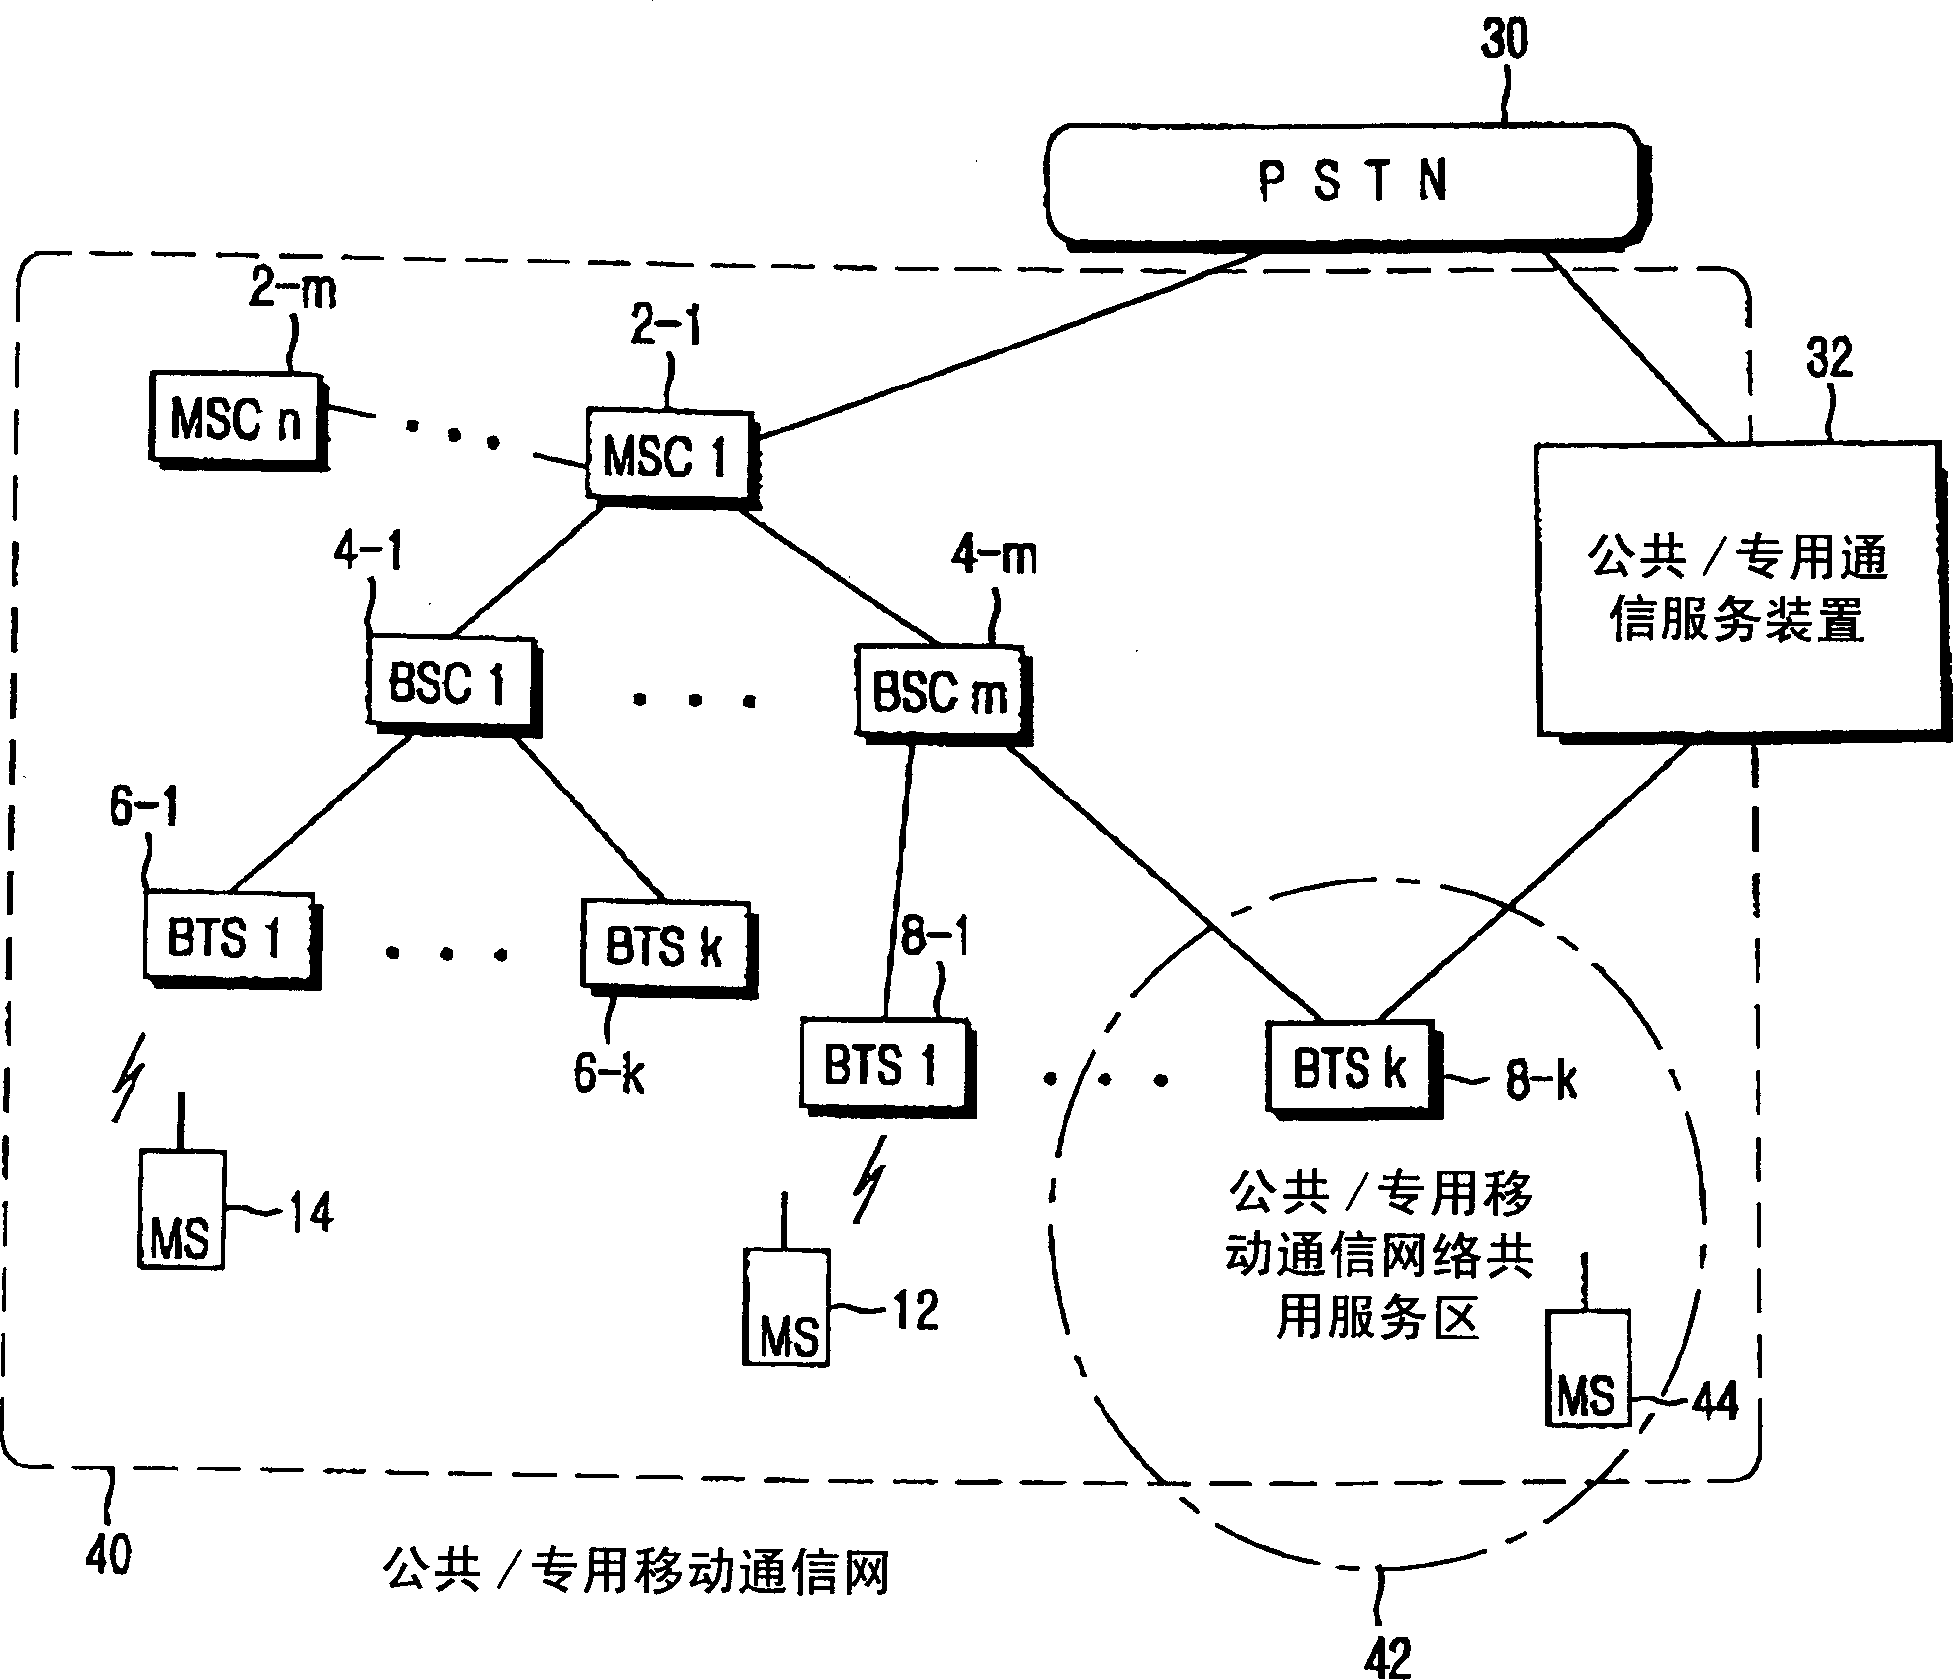 Service apparatus and method for pubilc mobile communication network, special line and mobile communication network